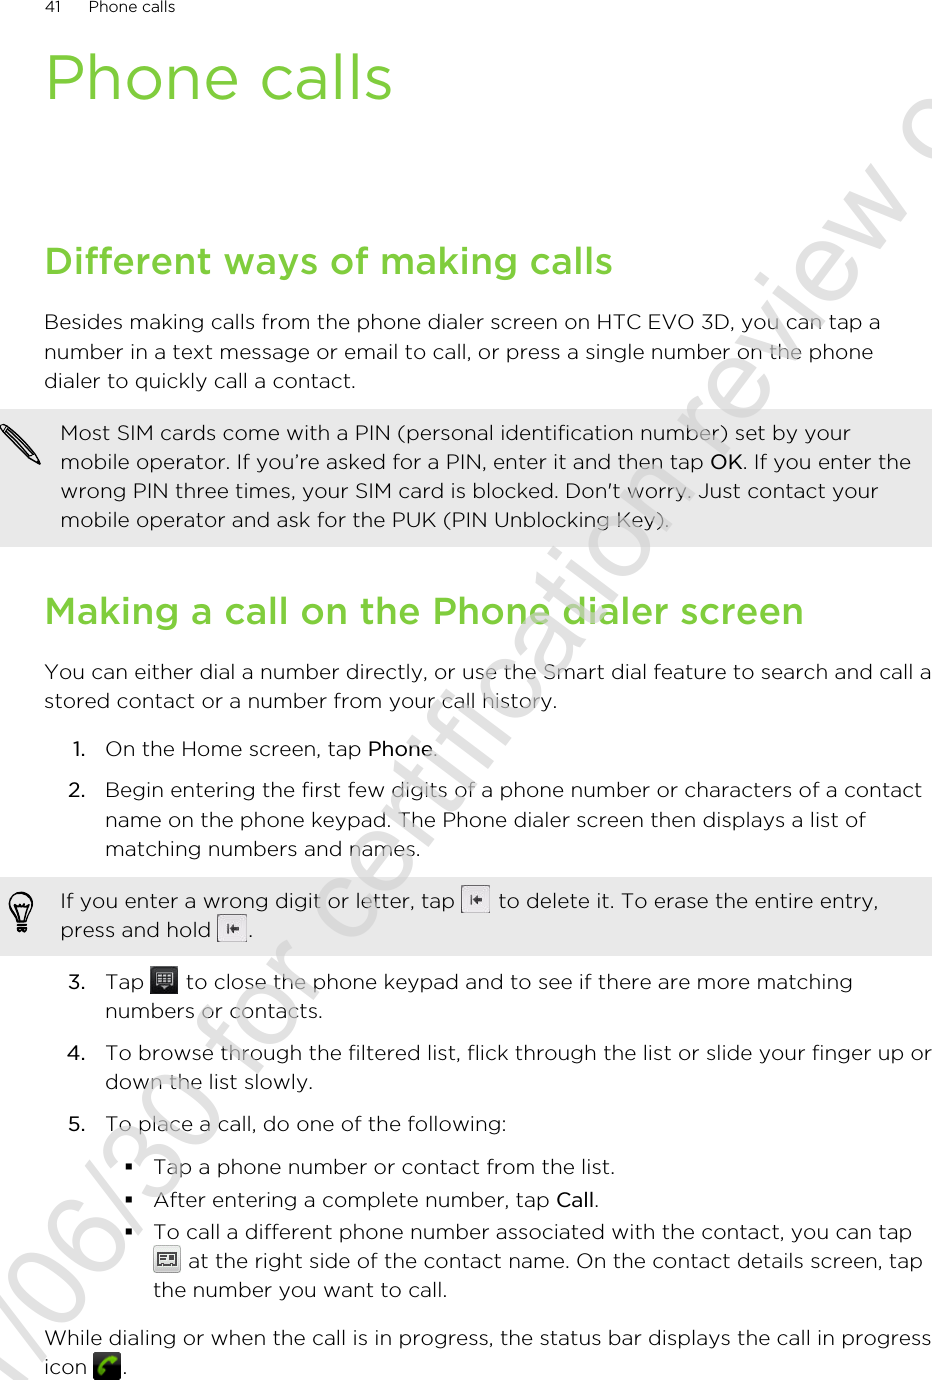 Phone callsDifferent ways of making callsBesides making calls from the phone dialer screen on HTC EVO 3D, you can tap anumber in a text message or email to call, or press a single number on the phonedialer to quickly call a contact.Most SIM cards come with a PIN (personal identification number) set by yourmobile operator. If you’re asked for a PIN, enter it and then tap OK. If you enter thewrong PIN three times, your SIM card is blocked. Don&apos;t worry. Just contact yourmobile operator and ask for the PUK (PIN Unblocking Key).Making a call on the Phone dialer screenYou can either dial a number directly, or use the Smart dial feature to search and call astored contact or a number from your call history.1. On the Home screen, tap Phone.2. Begin entering the first few digits of a phone number or characters of a contactname on the phone keypad. The Phone dialer screen then displays a list ofmatching numbers and names.If you enter a wrong digit or letter, tap   to delete it. To erase the entire entry,press and hold  .3. Tap   to close the phone keypad and to see if there are more matchingnumbers or contacts.4. To browse through the filtered list, flick through the list or slide your finger up ordown the list slowly.5. To place a call, do one of the following:§Tap a phone number or contact from the list.§After entering a complete number, tap Call.§To call a different phone number associated with the contact, you can tap at the right side of the contact name. On the contact details screen, tapthe number you want to call.While dialing or when the call is in progress, the status bar displays the call in progressicon  .41 Phone calls2011/06/30 for certification review only